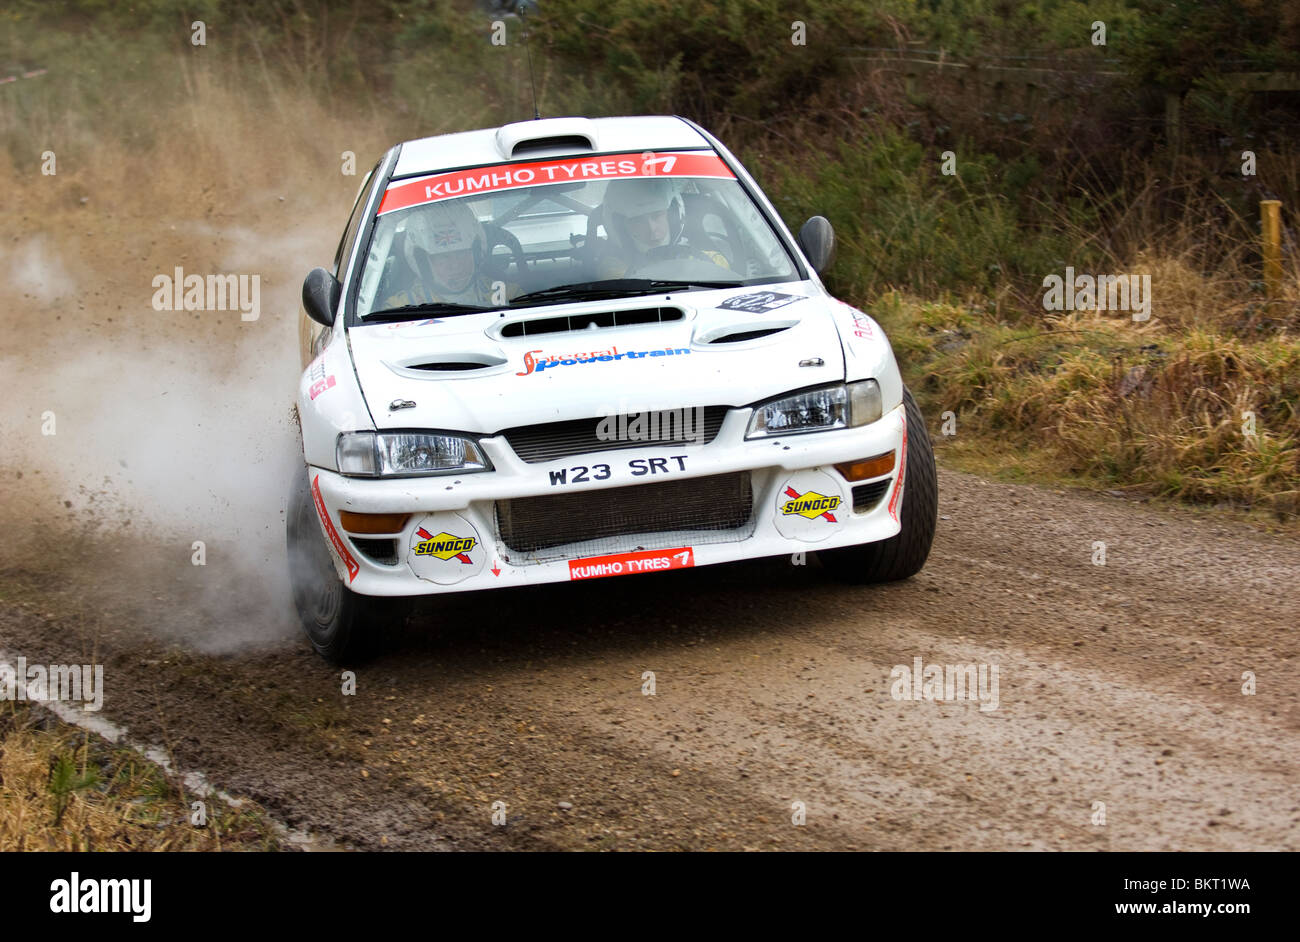 Rally car with steam coming from the wheels Stock Photo